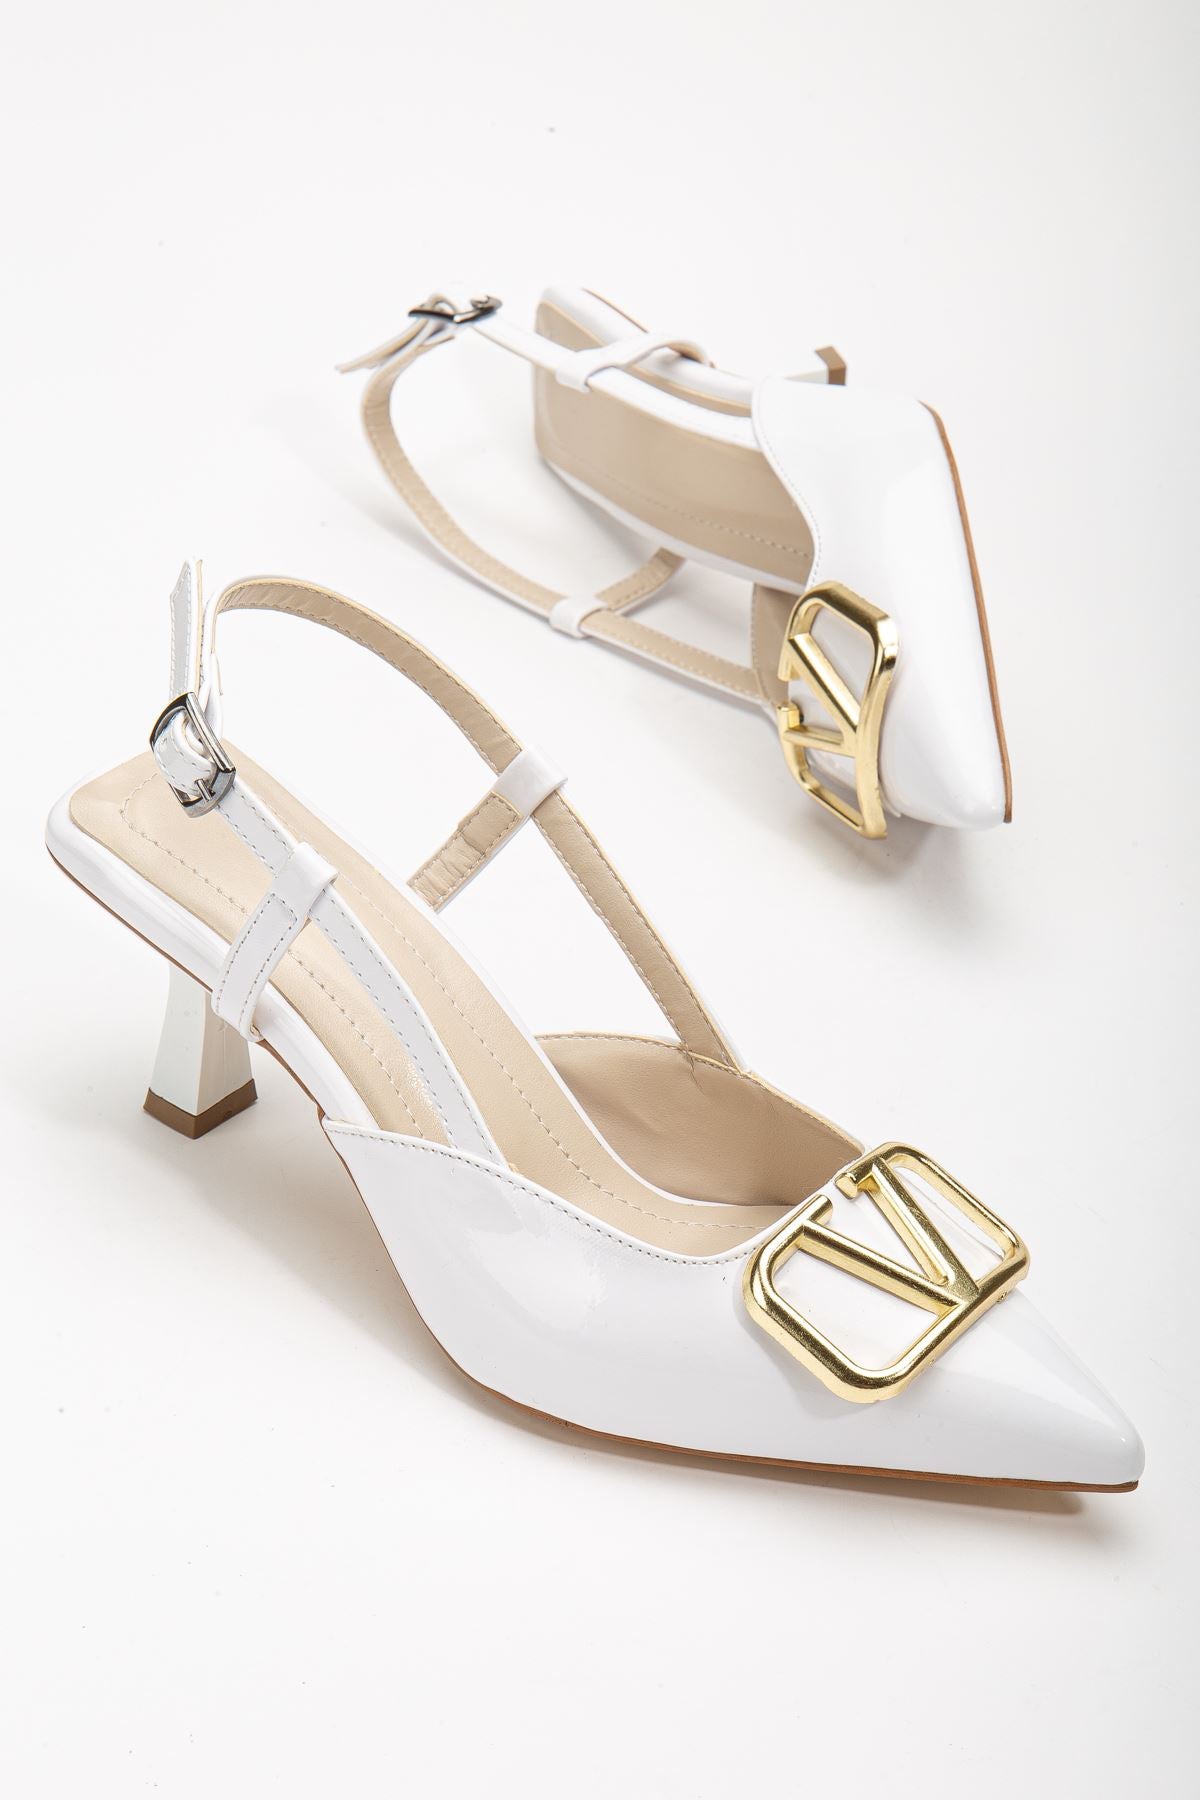 Women's Lianne White Patent Leather Buckle Detailed Thin Heeled Shoes - STREETMODE ™